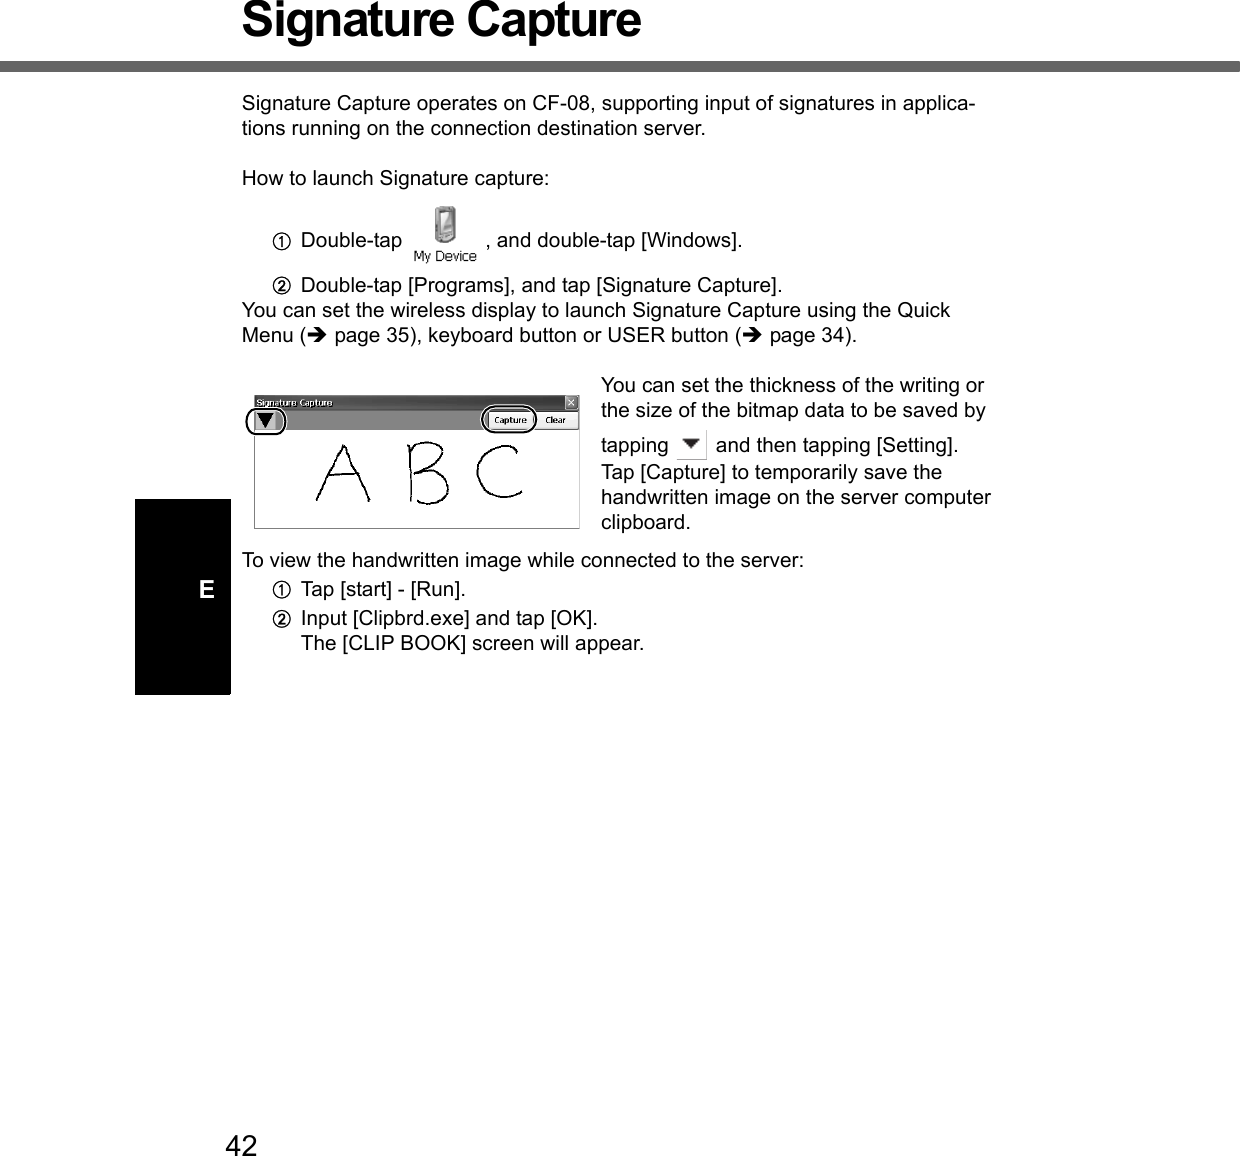 42ESignature CaptureSignature Capture operates on CF-08, supporting input of signatures in applica-tions running on the connection destination server.How to launch Signature capture:ADouble-tap  , and double-tap [Windows].BDouble-tap [Programs], and tap [Signature Capture].You can set the wireless display to launch Signature Capture using the Quick Menu (Îpage 35), keyboard button or USER button (Îpage 34). You can set the thickness of the writing or the size of the bitmap data to be saved by tapping   and then tapping [Setting]. Tap [Capture] to temporarily save the handwritten image on the server computer clipboard.To view the handwritten image while connected to the server: ATap [start] - [Run].BInput [Clipbrd.exe] and tap [OK].The [CLIP BOOK] screen will appear.